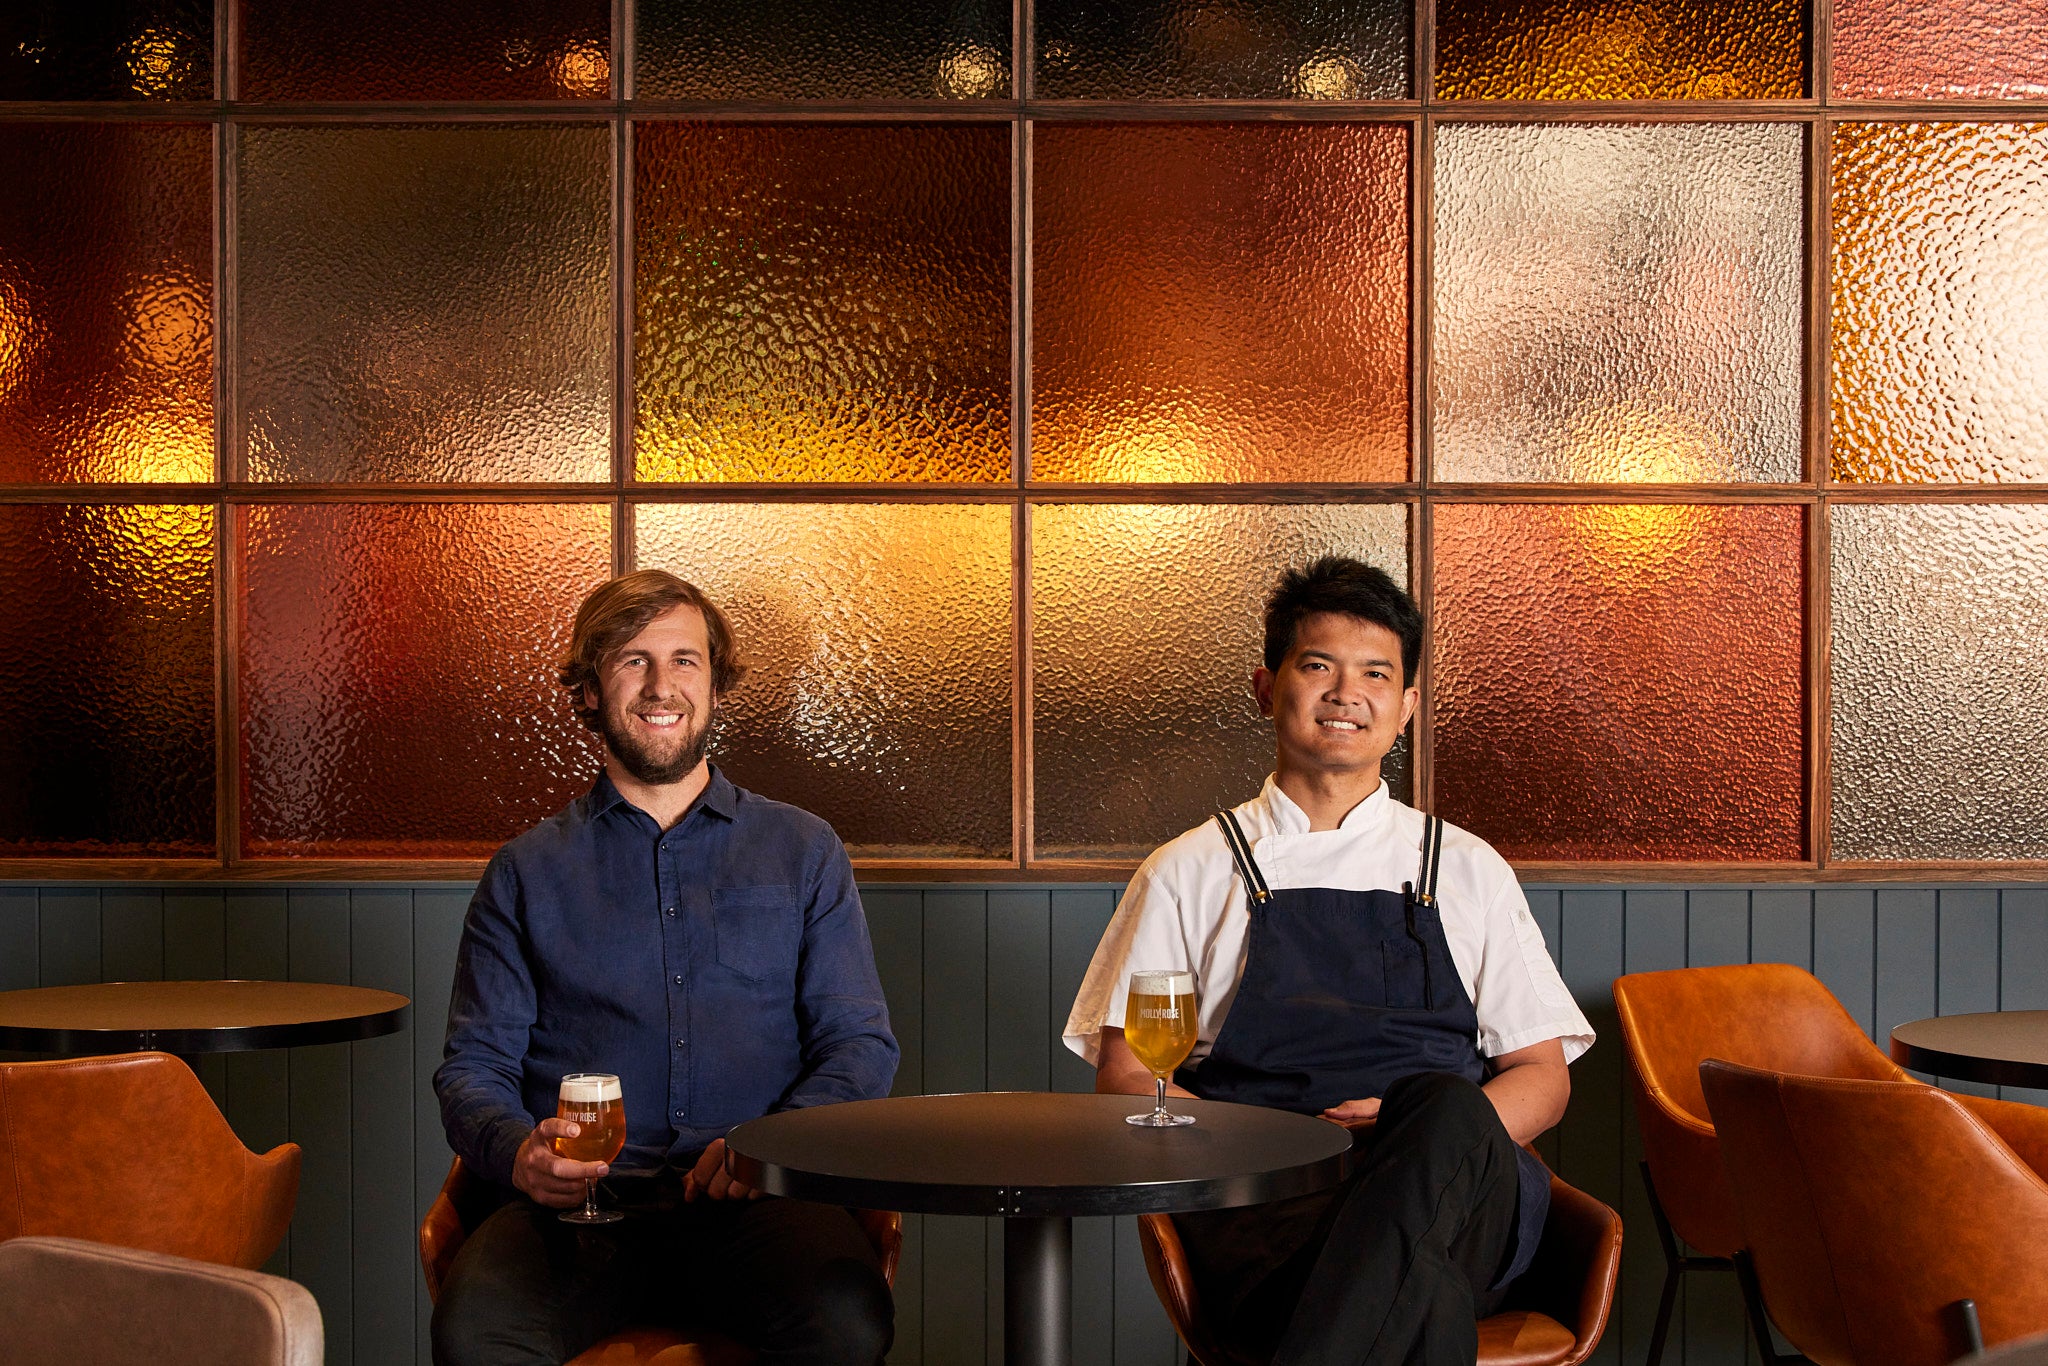 THE MATCHMAKERS: PAIRING FOOD WITH BEER